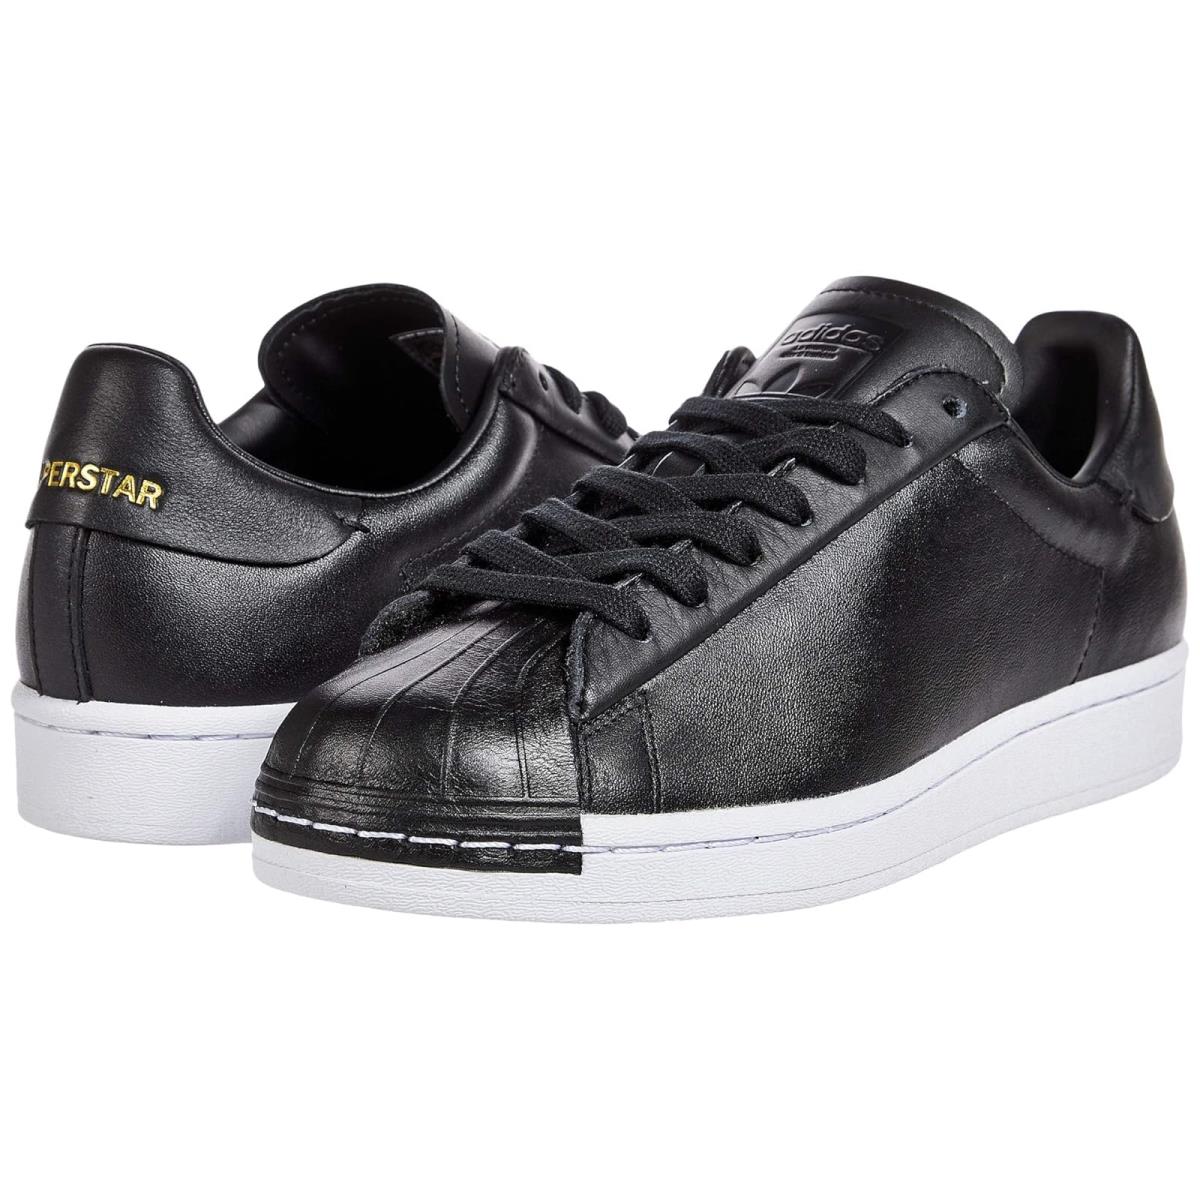 Woman`s Sneakers Athletic Shoes Adidas Originals Superstar Pure LT Black/White/Gold